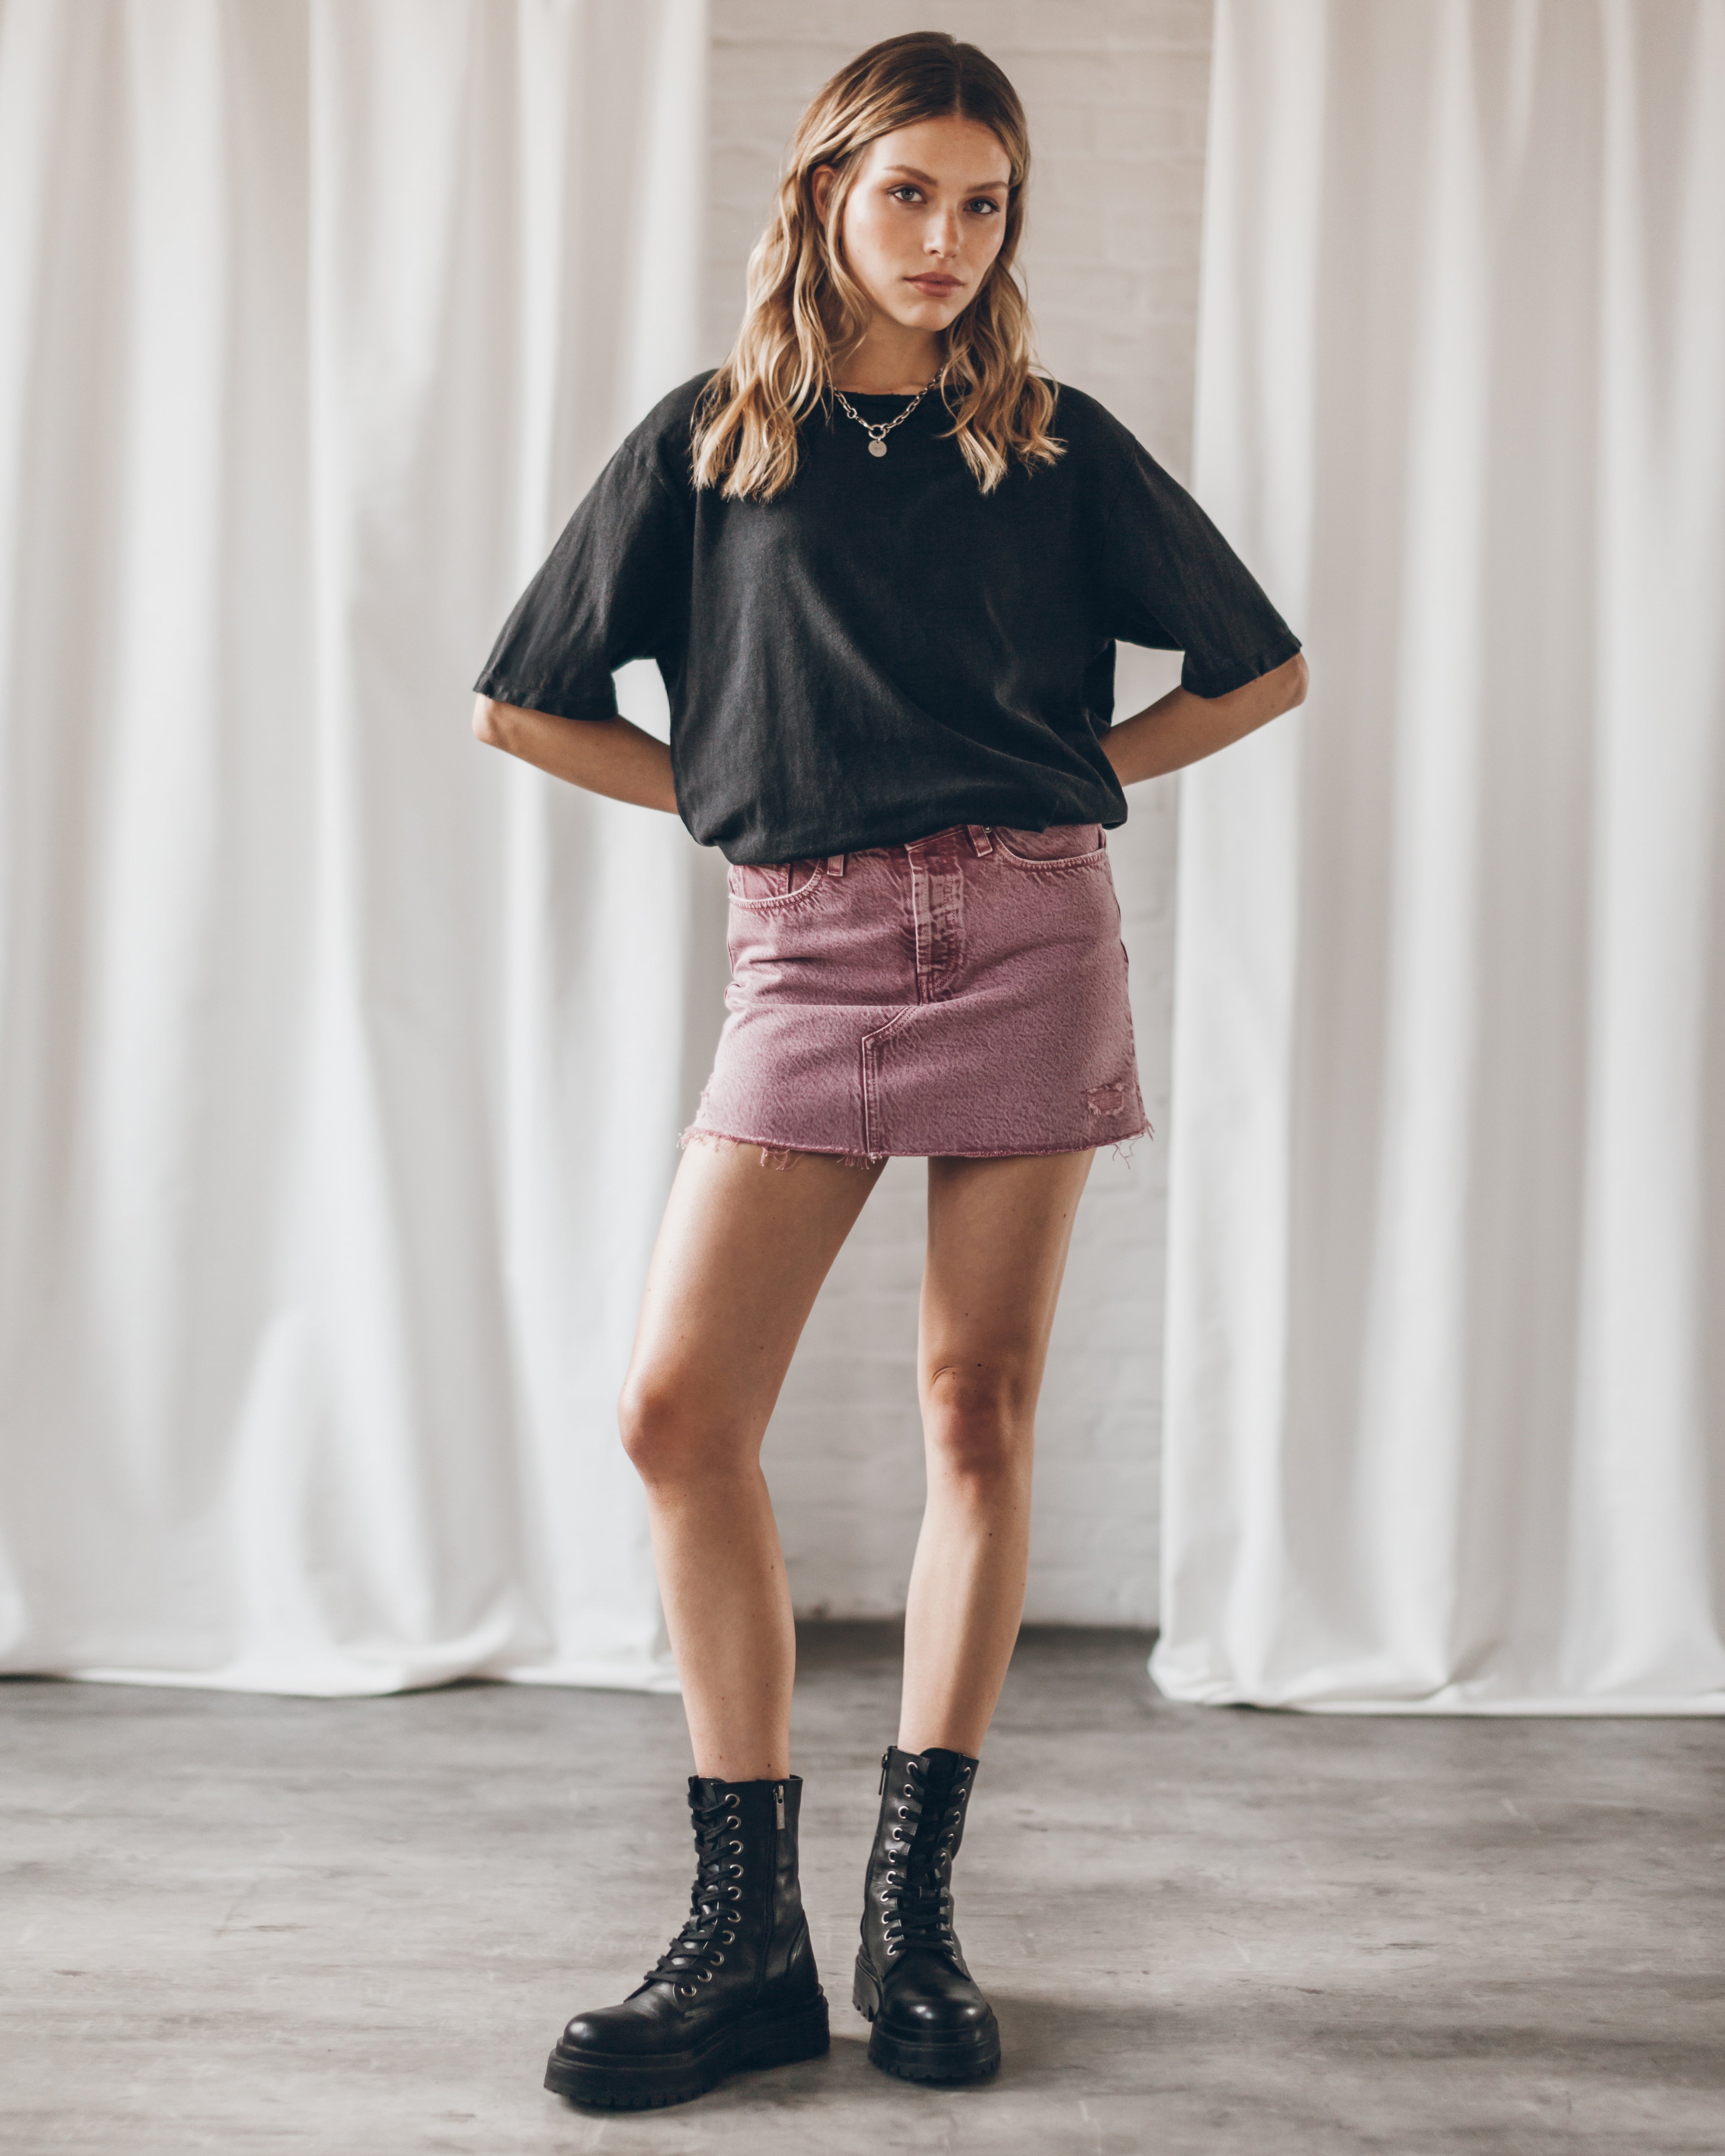 The Pink Faded Denim Skirt